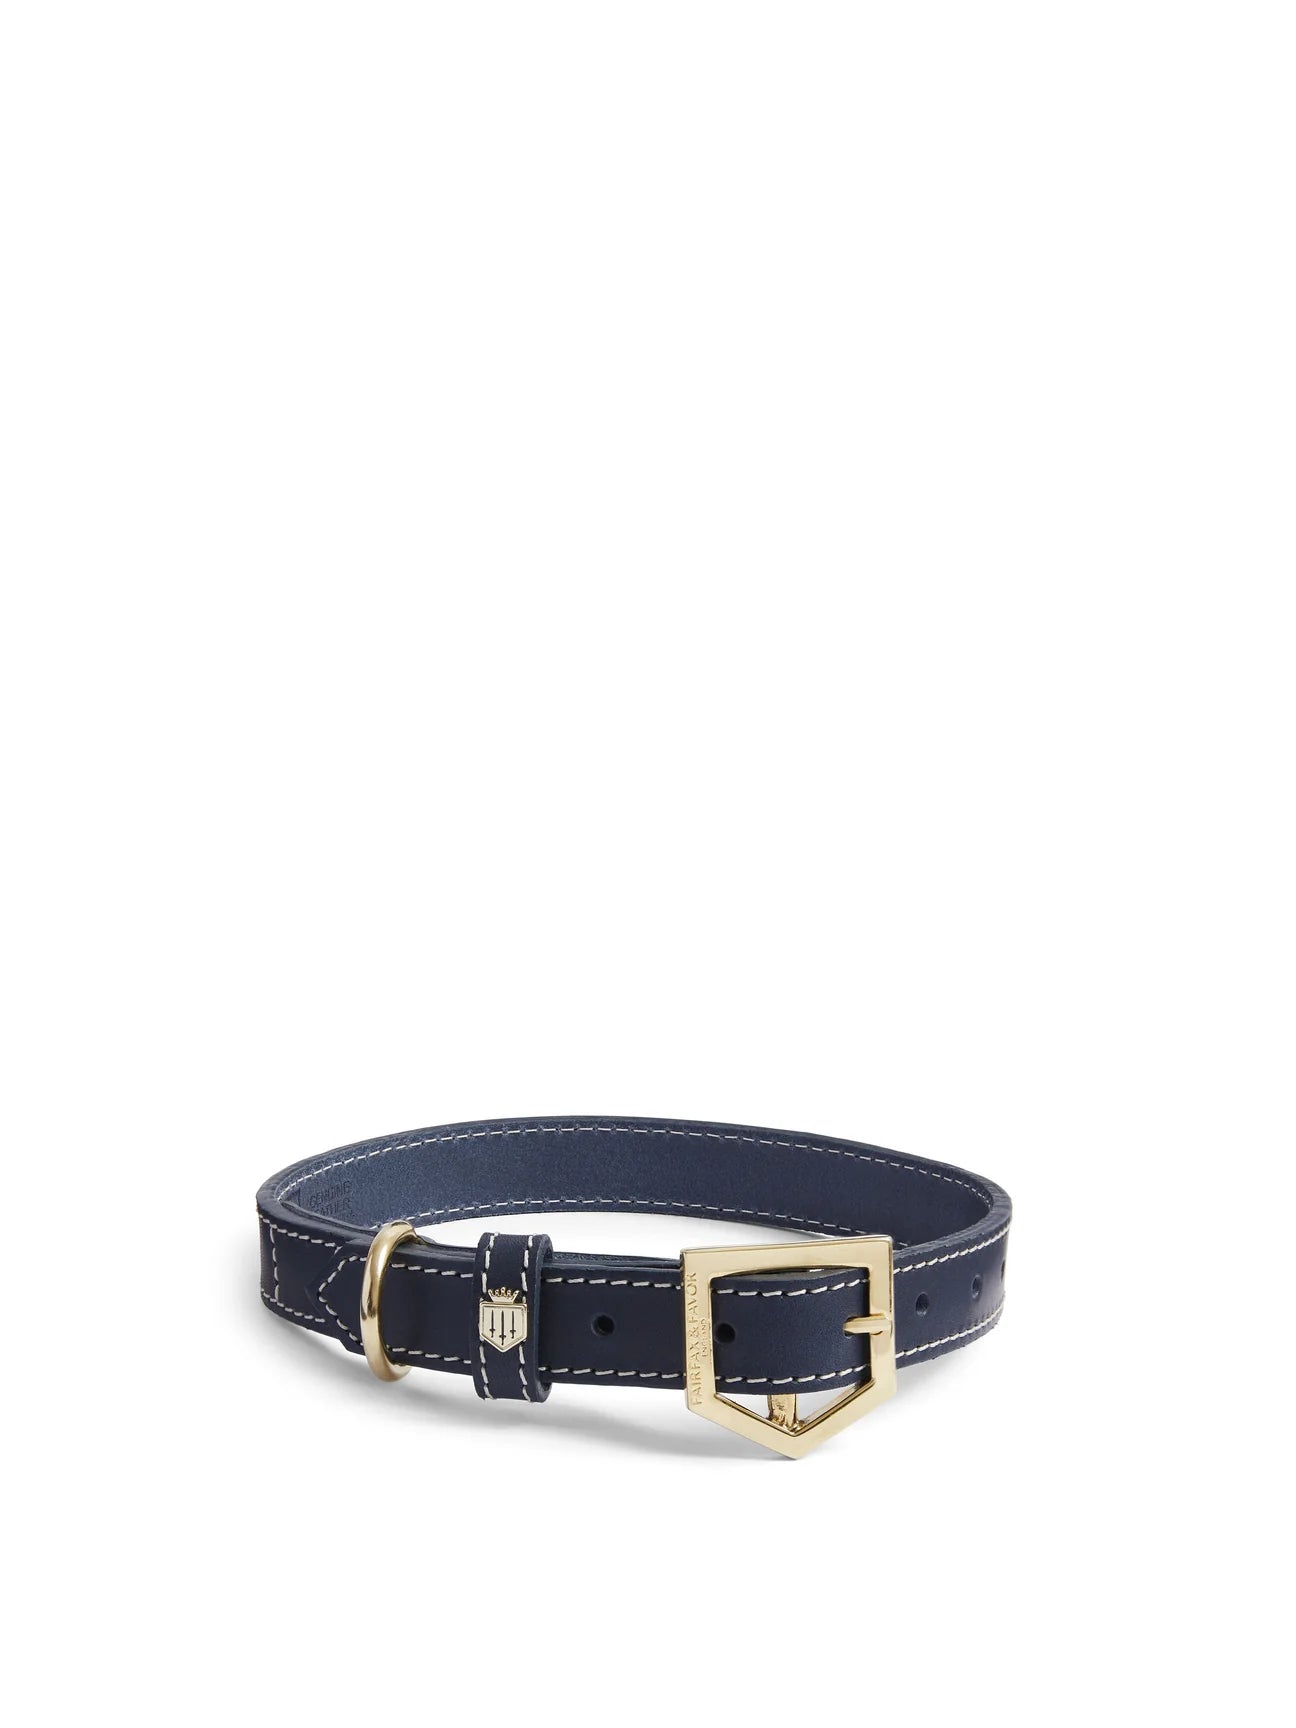 The Fitzroy Navy Leather Dog Collar